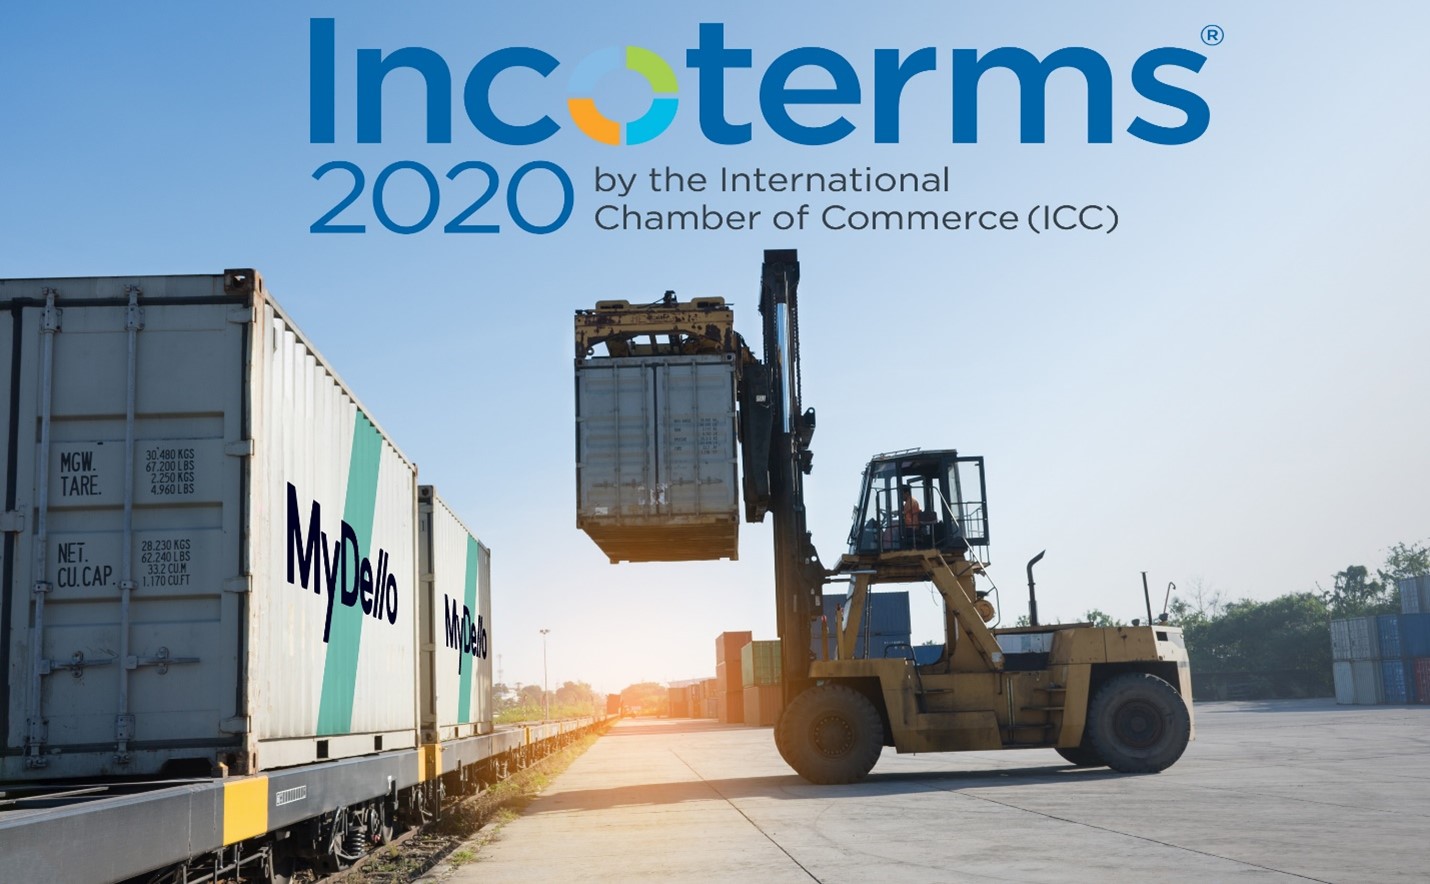 Mydello Incoterms 2020 Explained All You Need To Know About Terms Of Delivery 0598